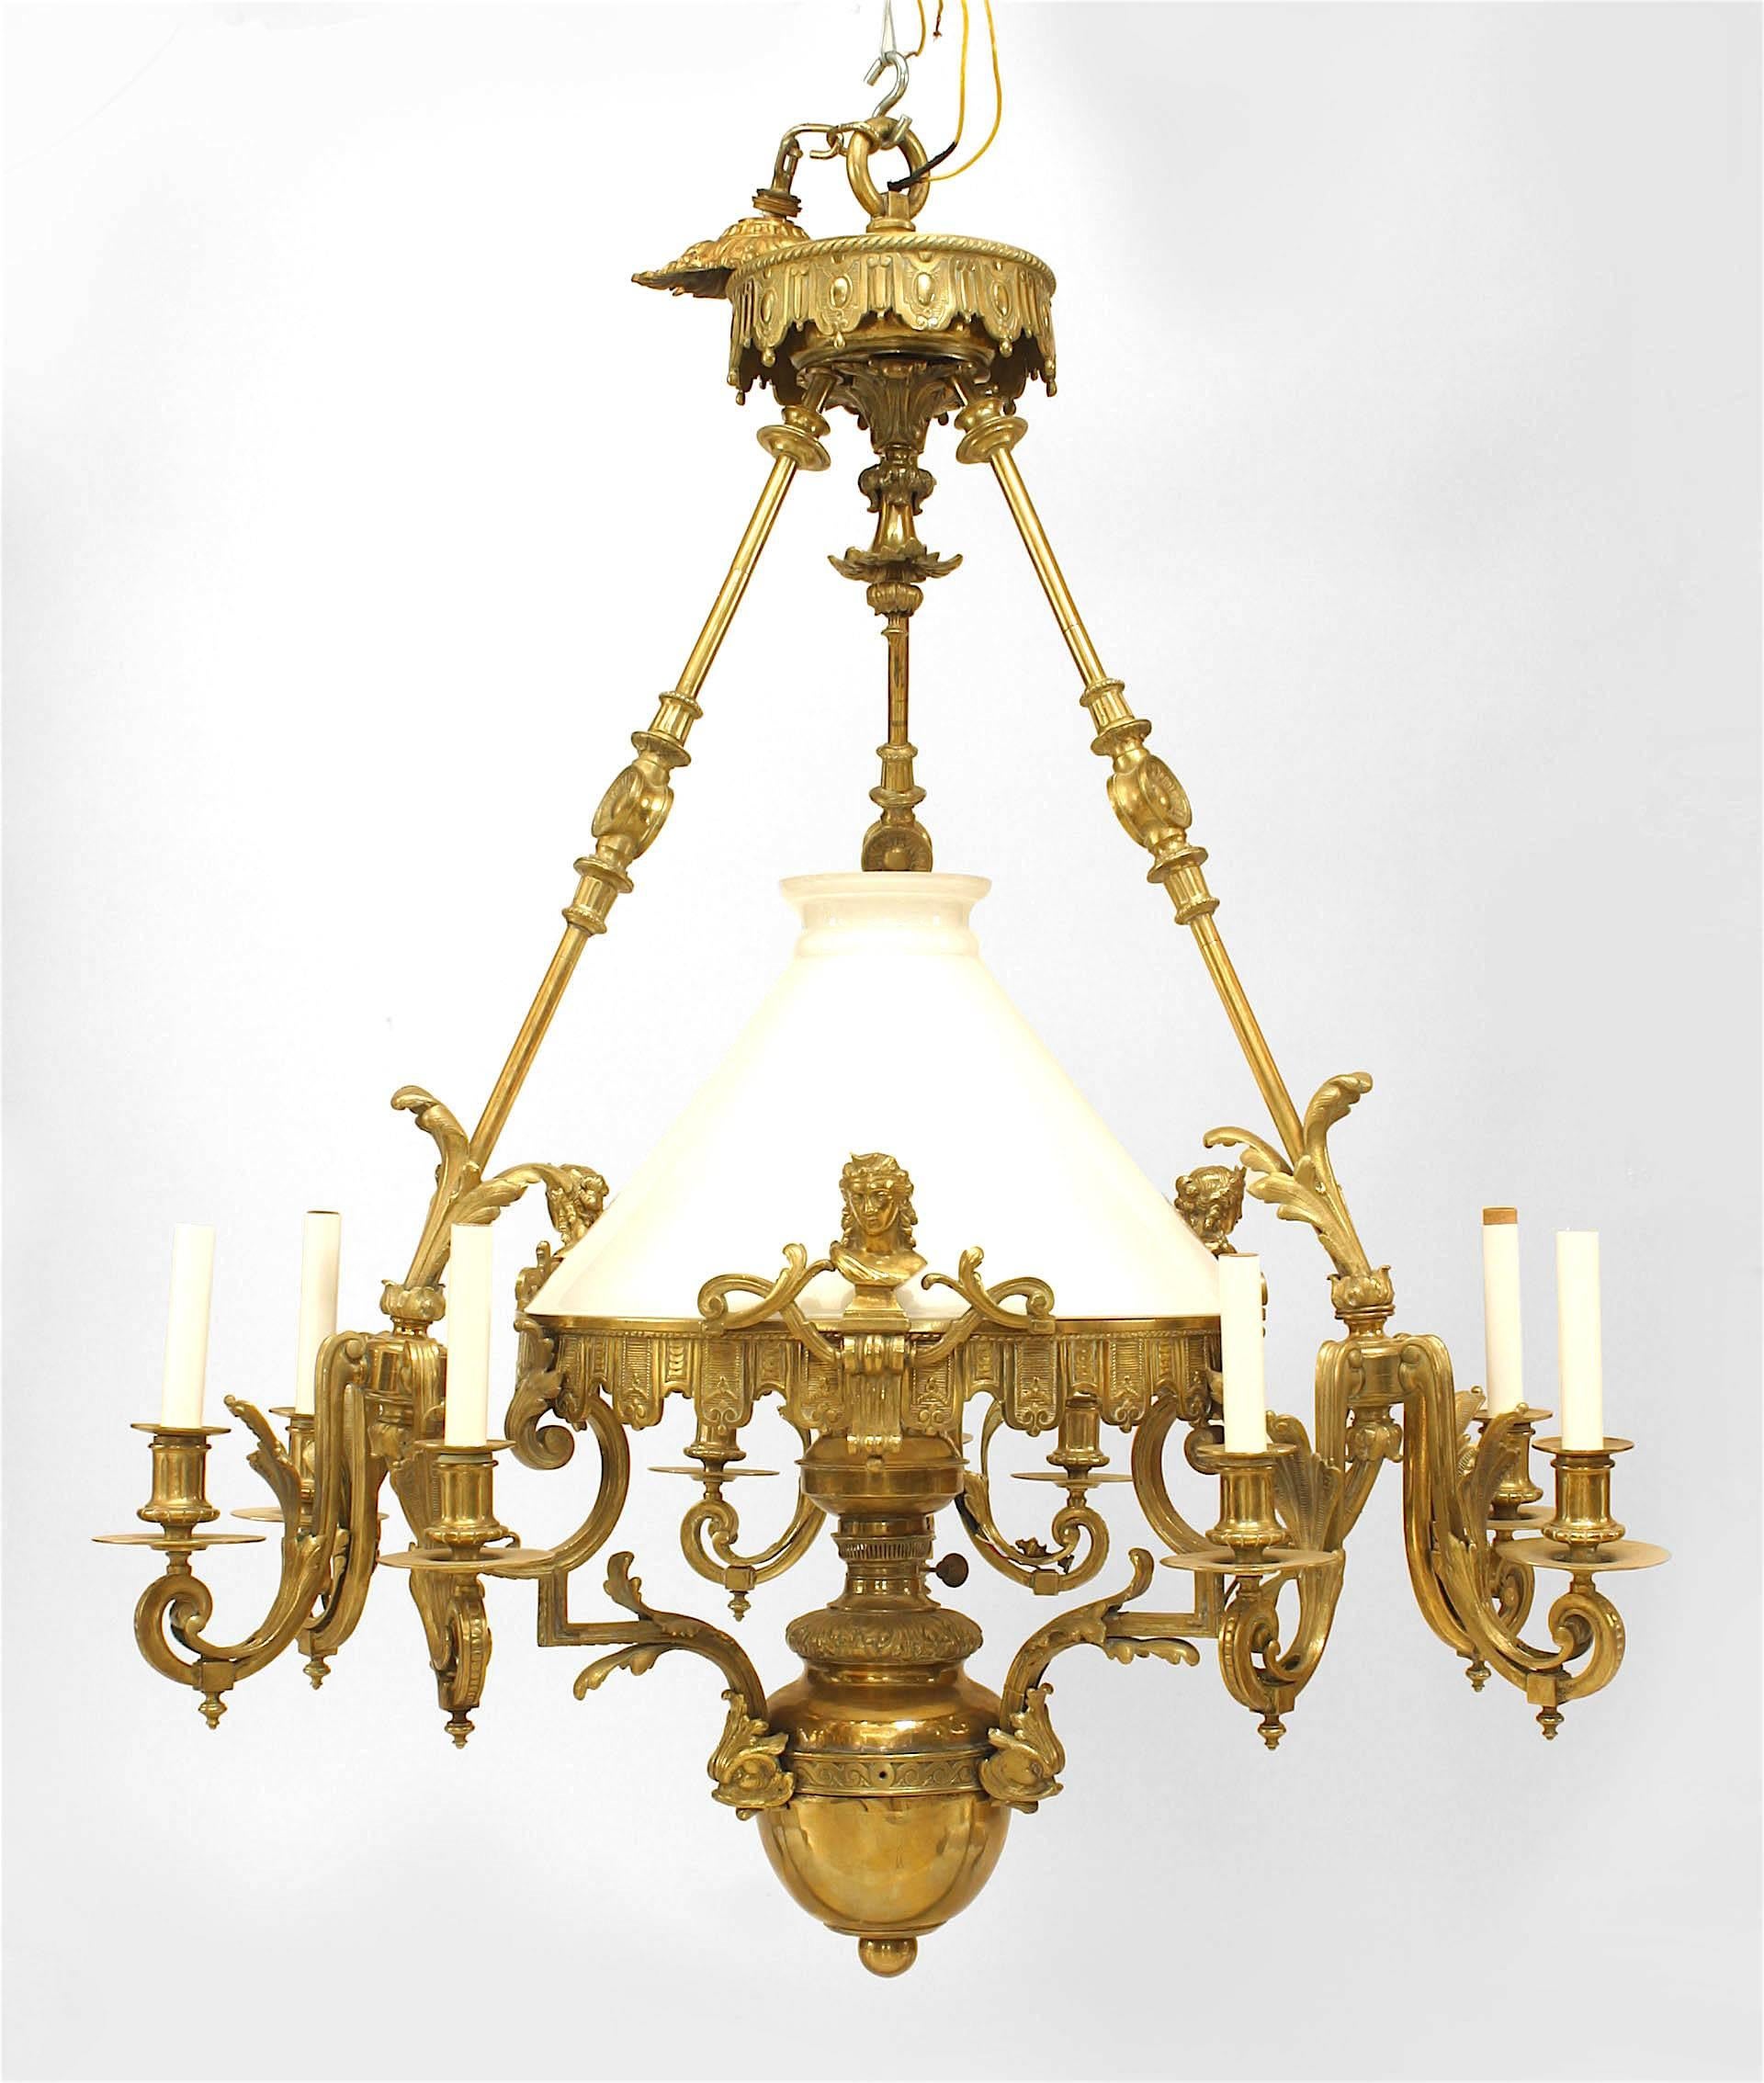 French Victorian bronze 9 light converted gas chandelier with 3 lights on 3 foliate detailed arms with white glass center shade covering a center oil fount.
